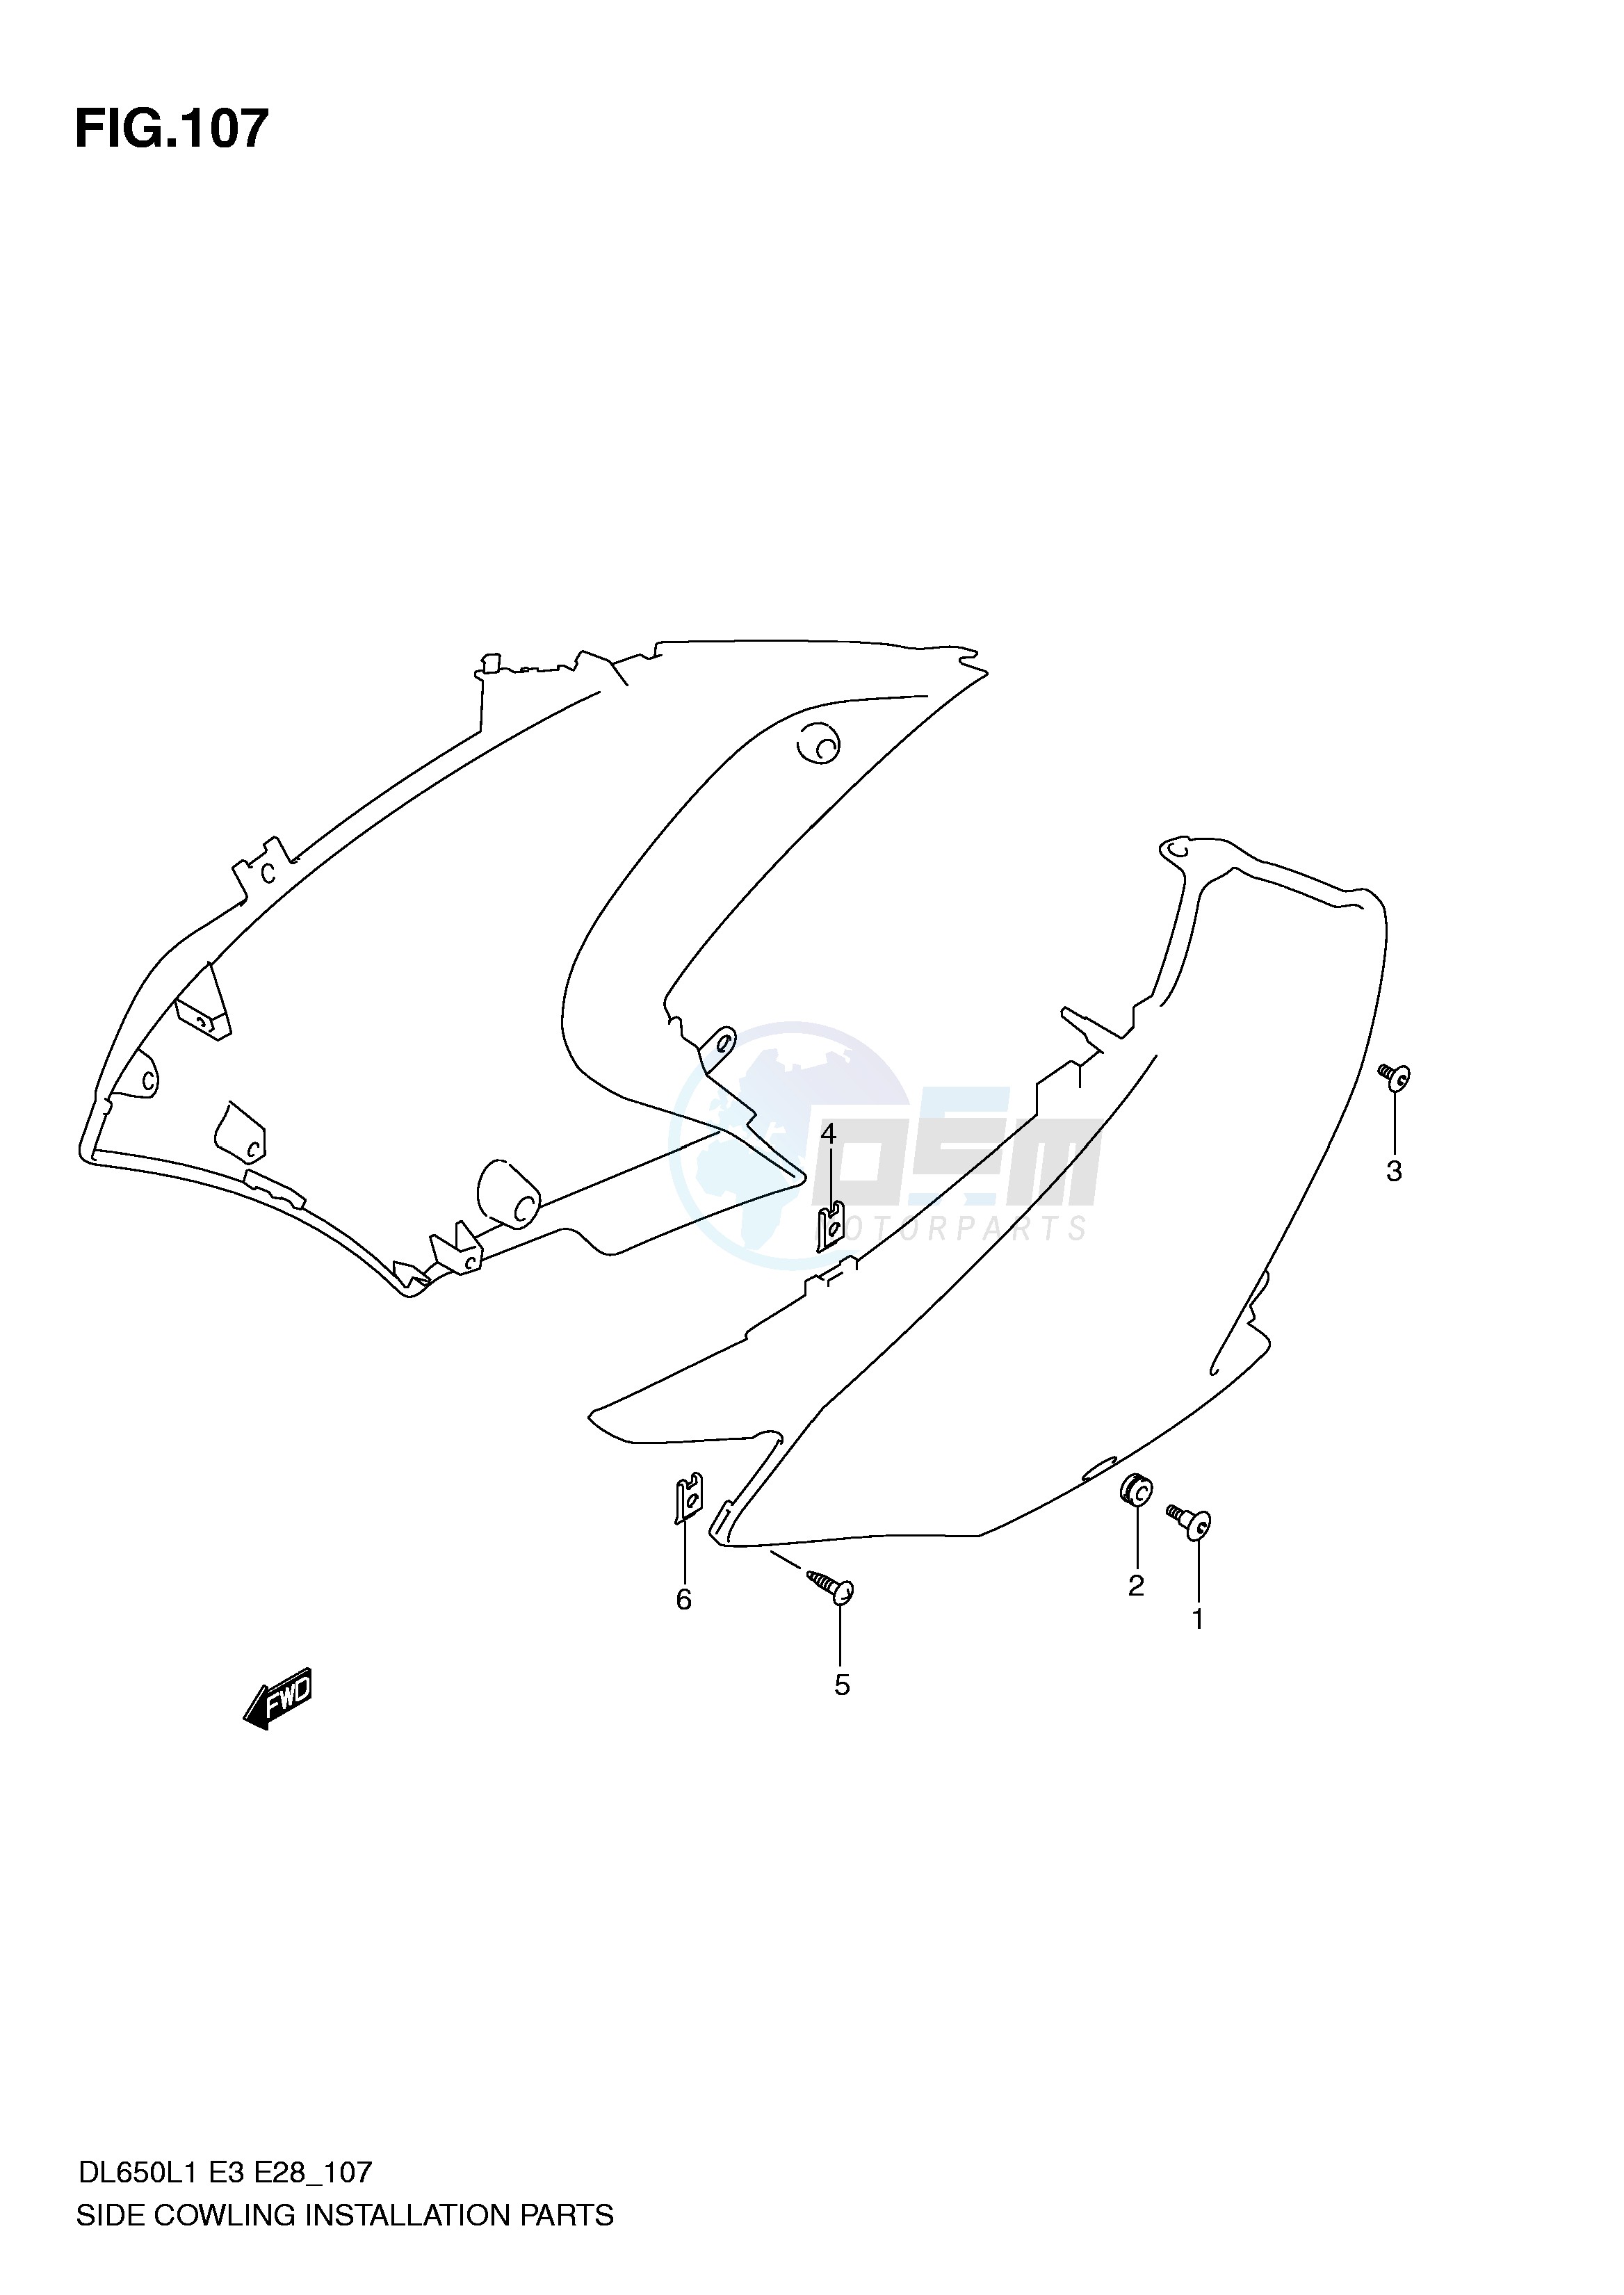 SIDE COWLING INSTALLATION PARTS image